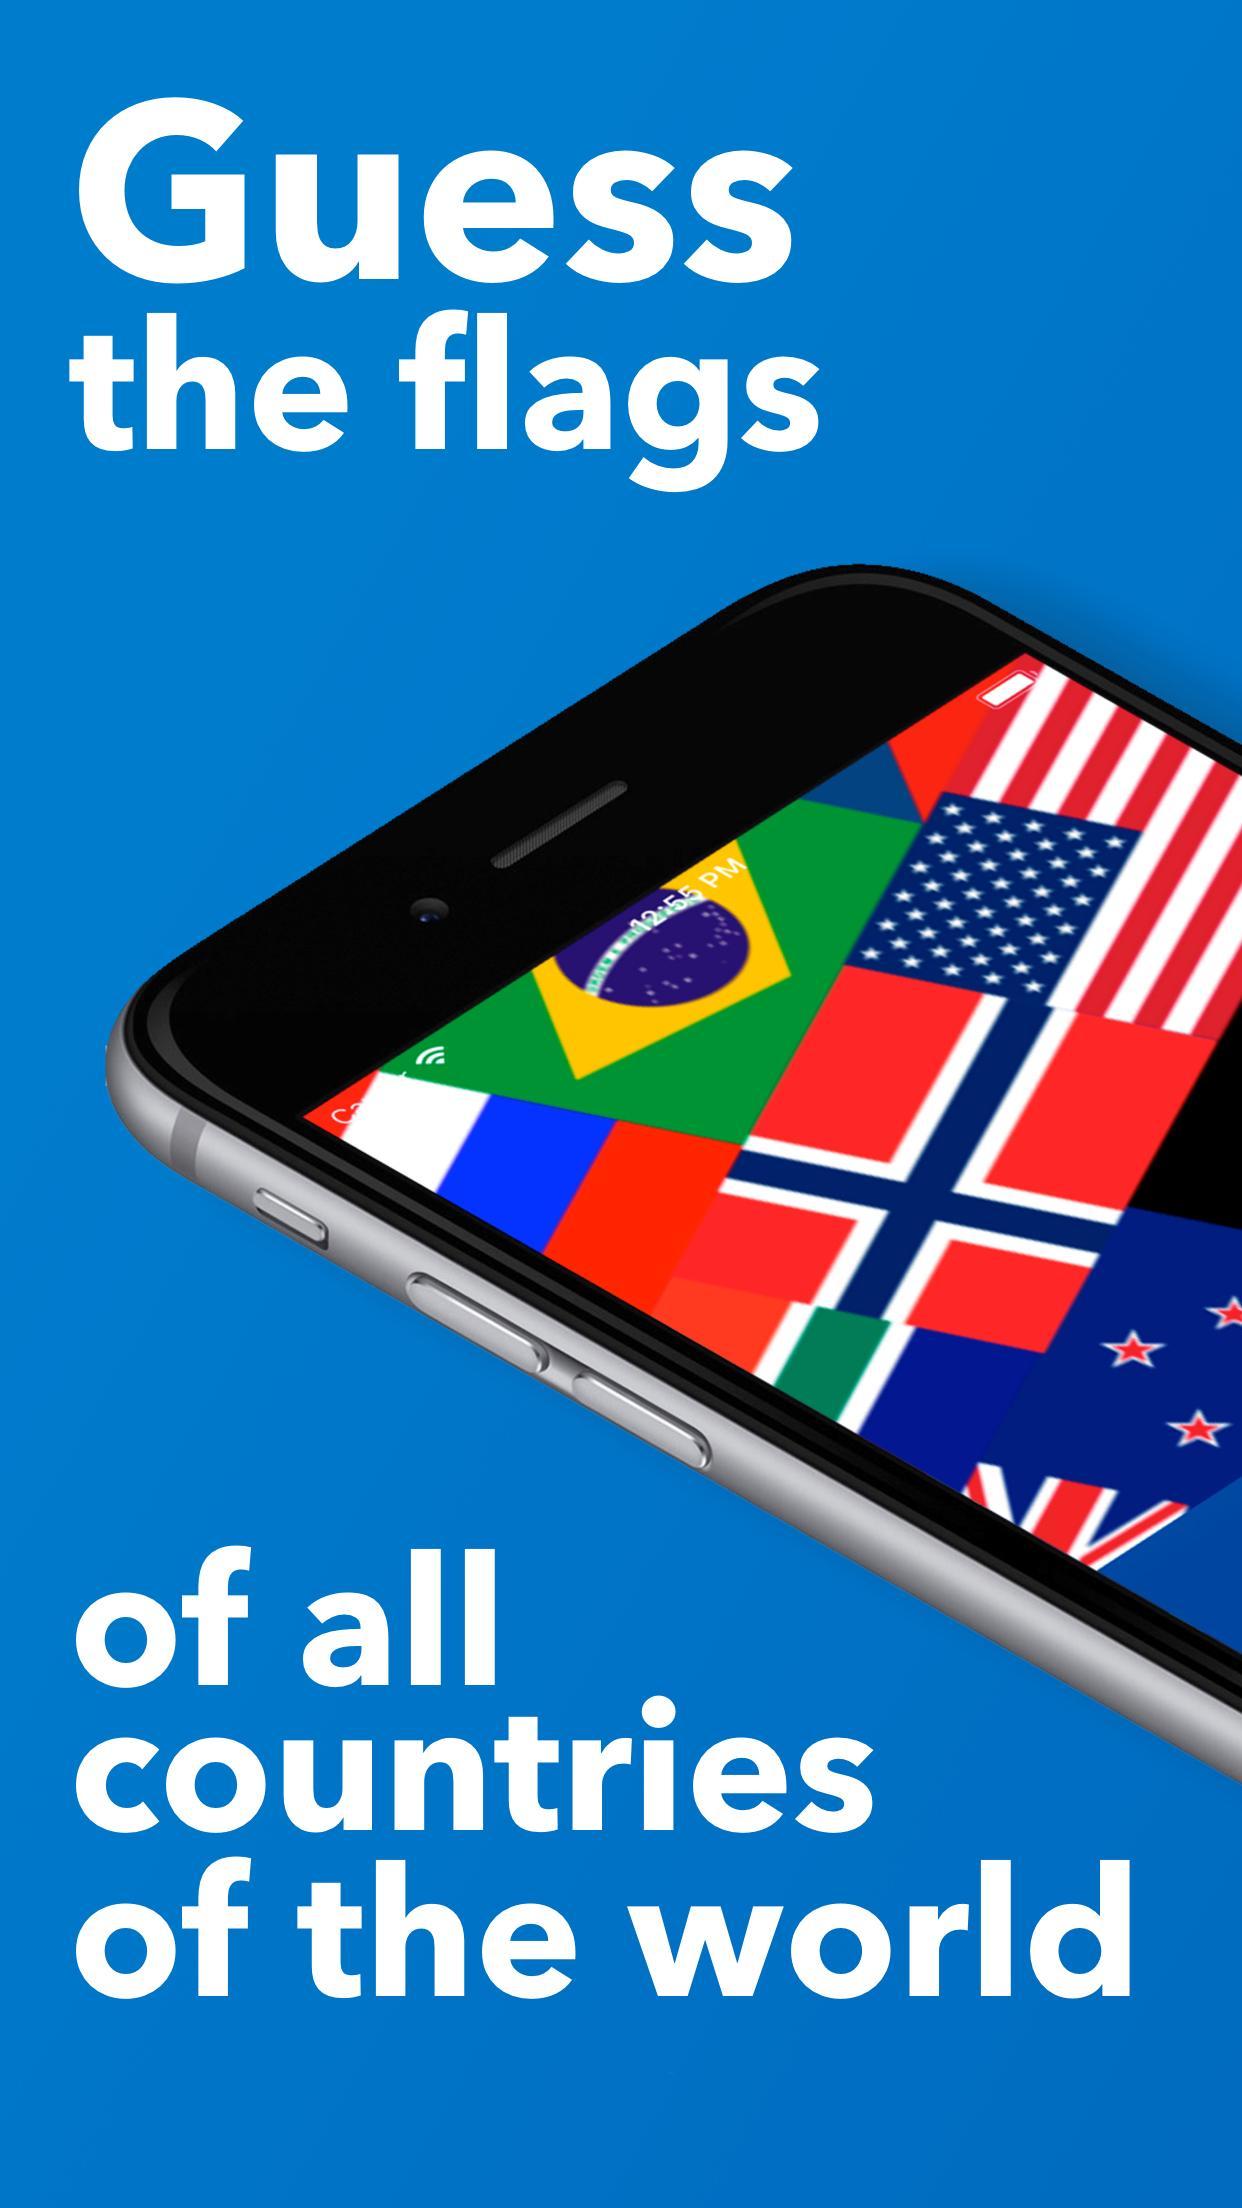 Flags All Countries the World: Guess Quiz for Android - APK Download